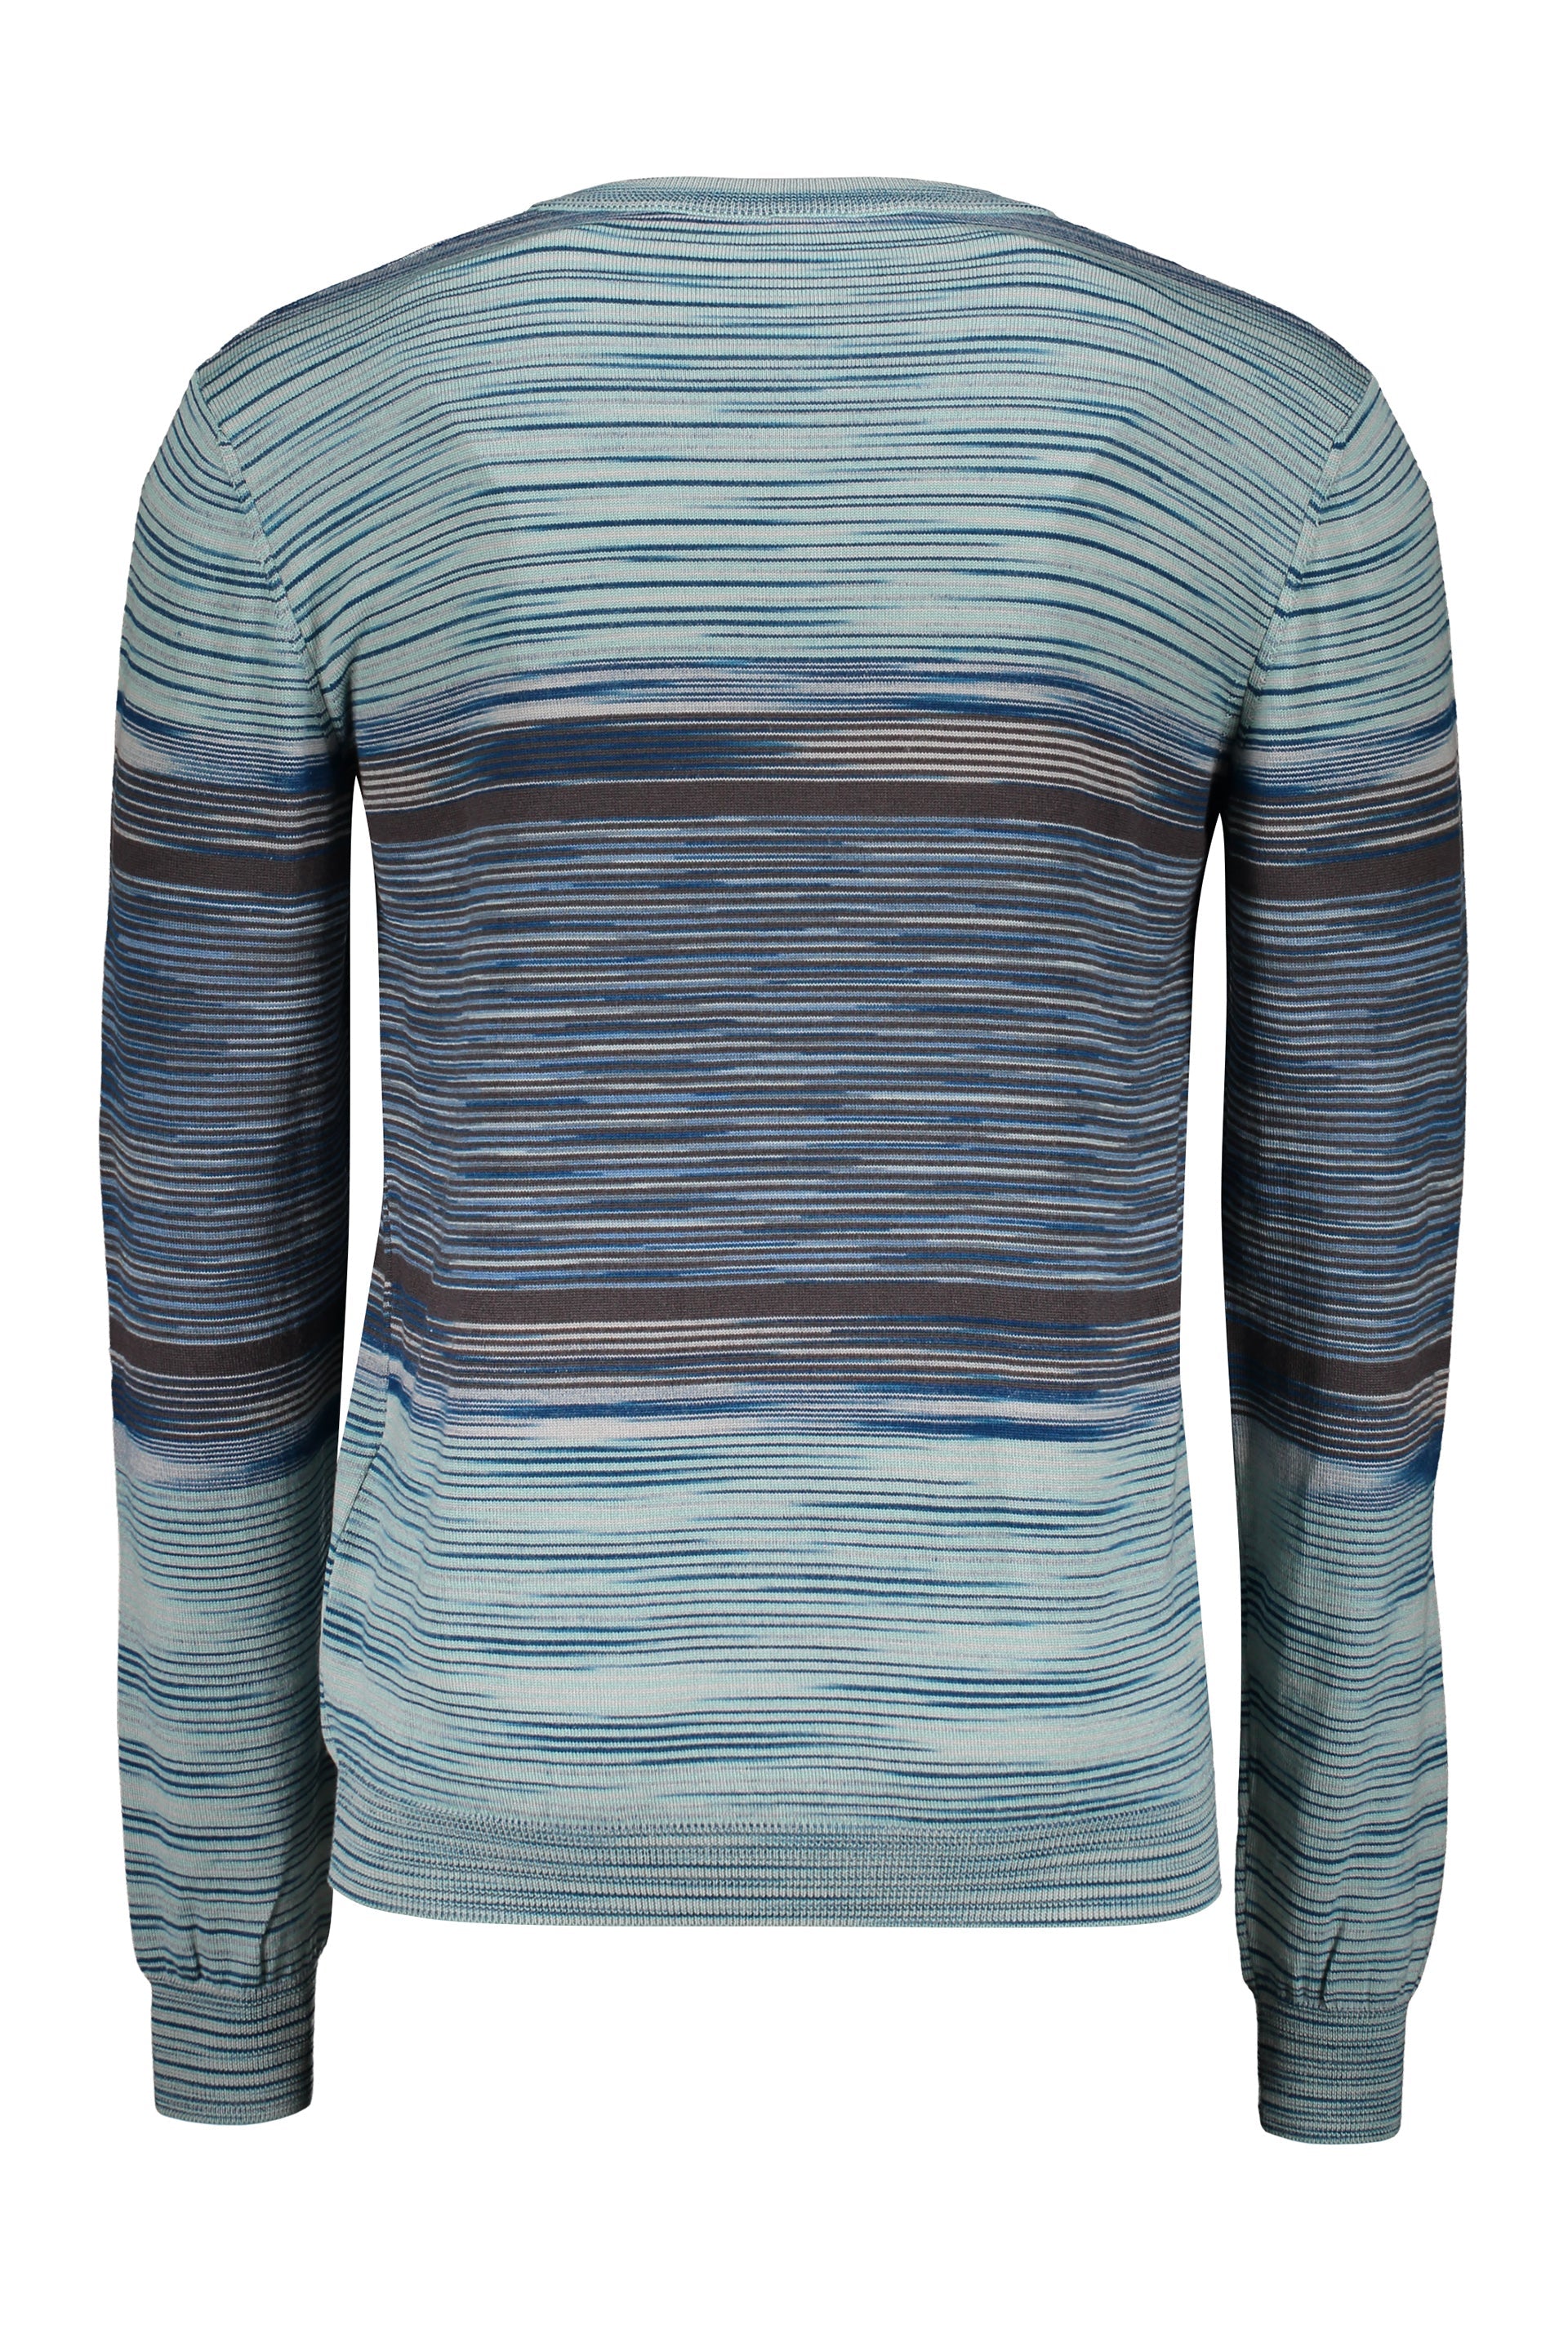 M-Missoni-OUTLET-SALE-Wool-V-neck-sweater-Strick-ARCHIVE-COLLECTION-2.jpg